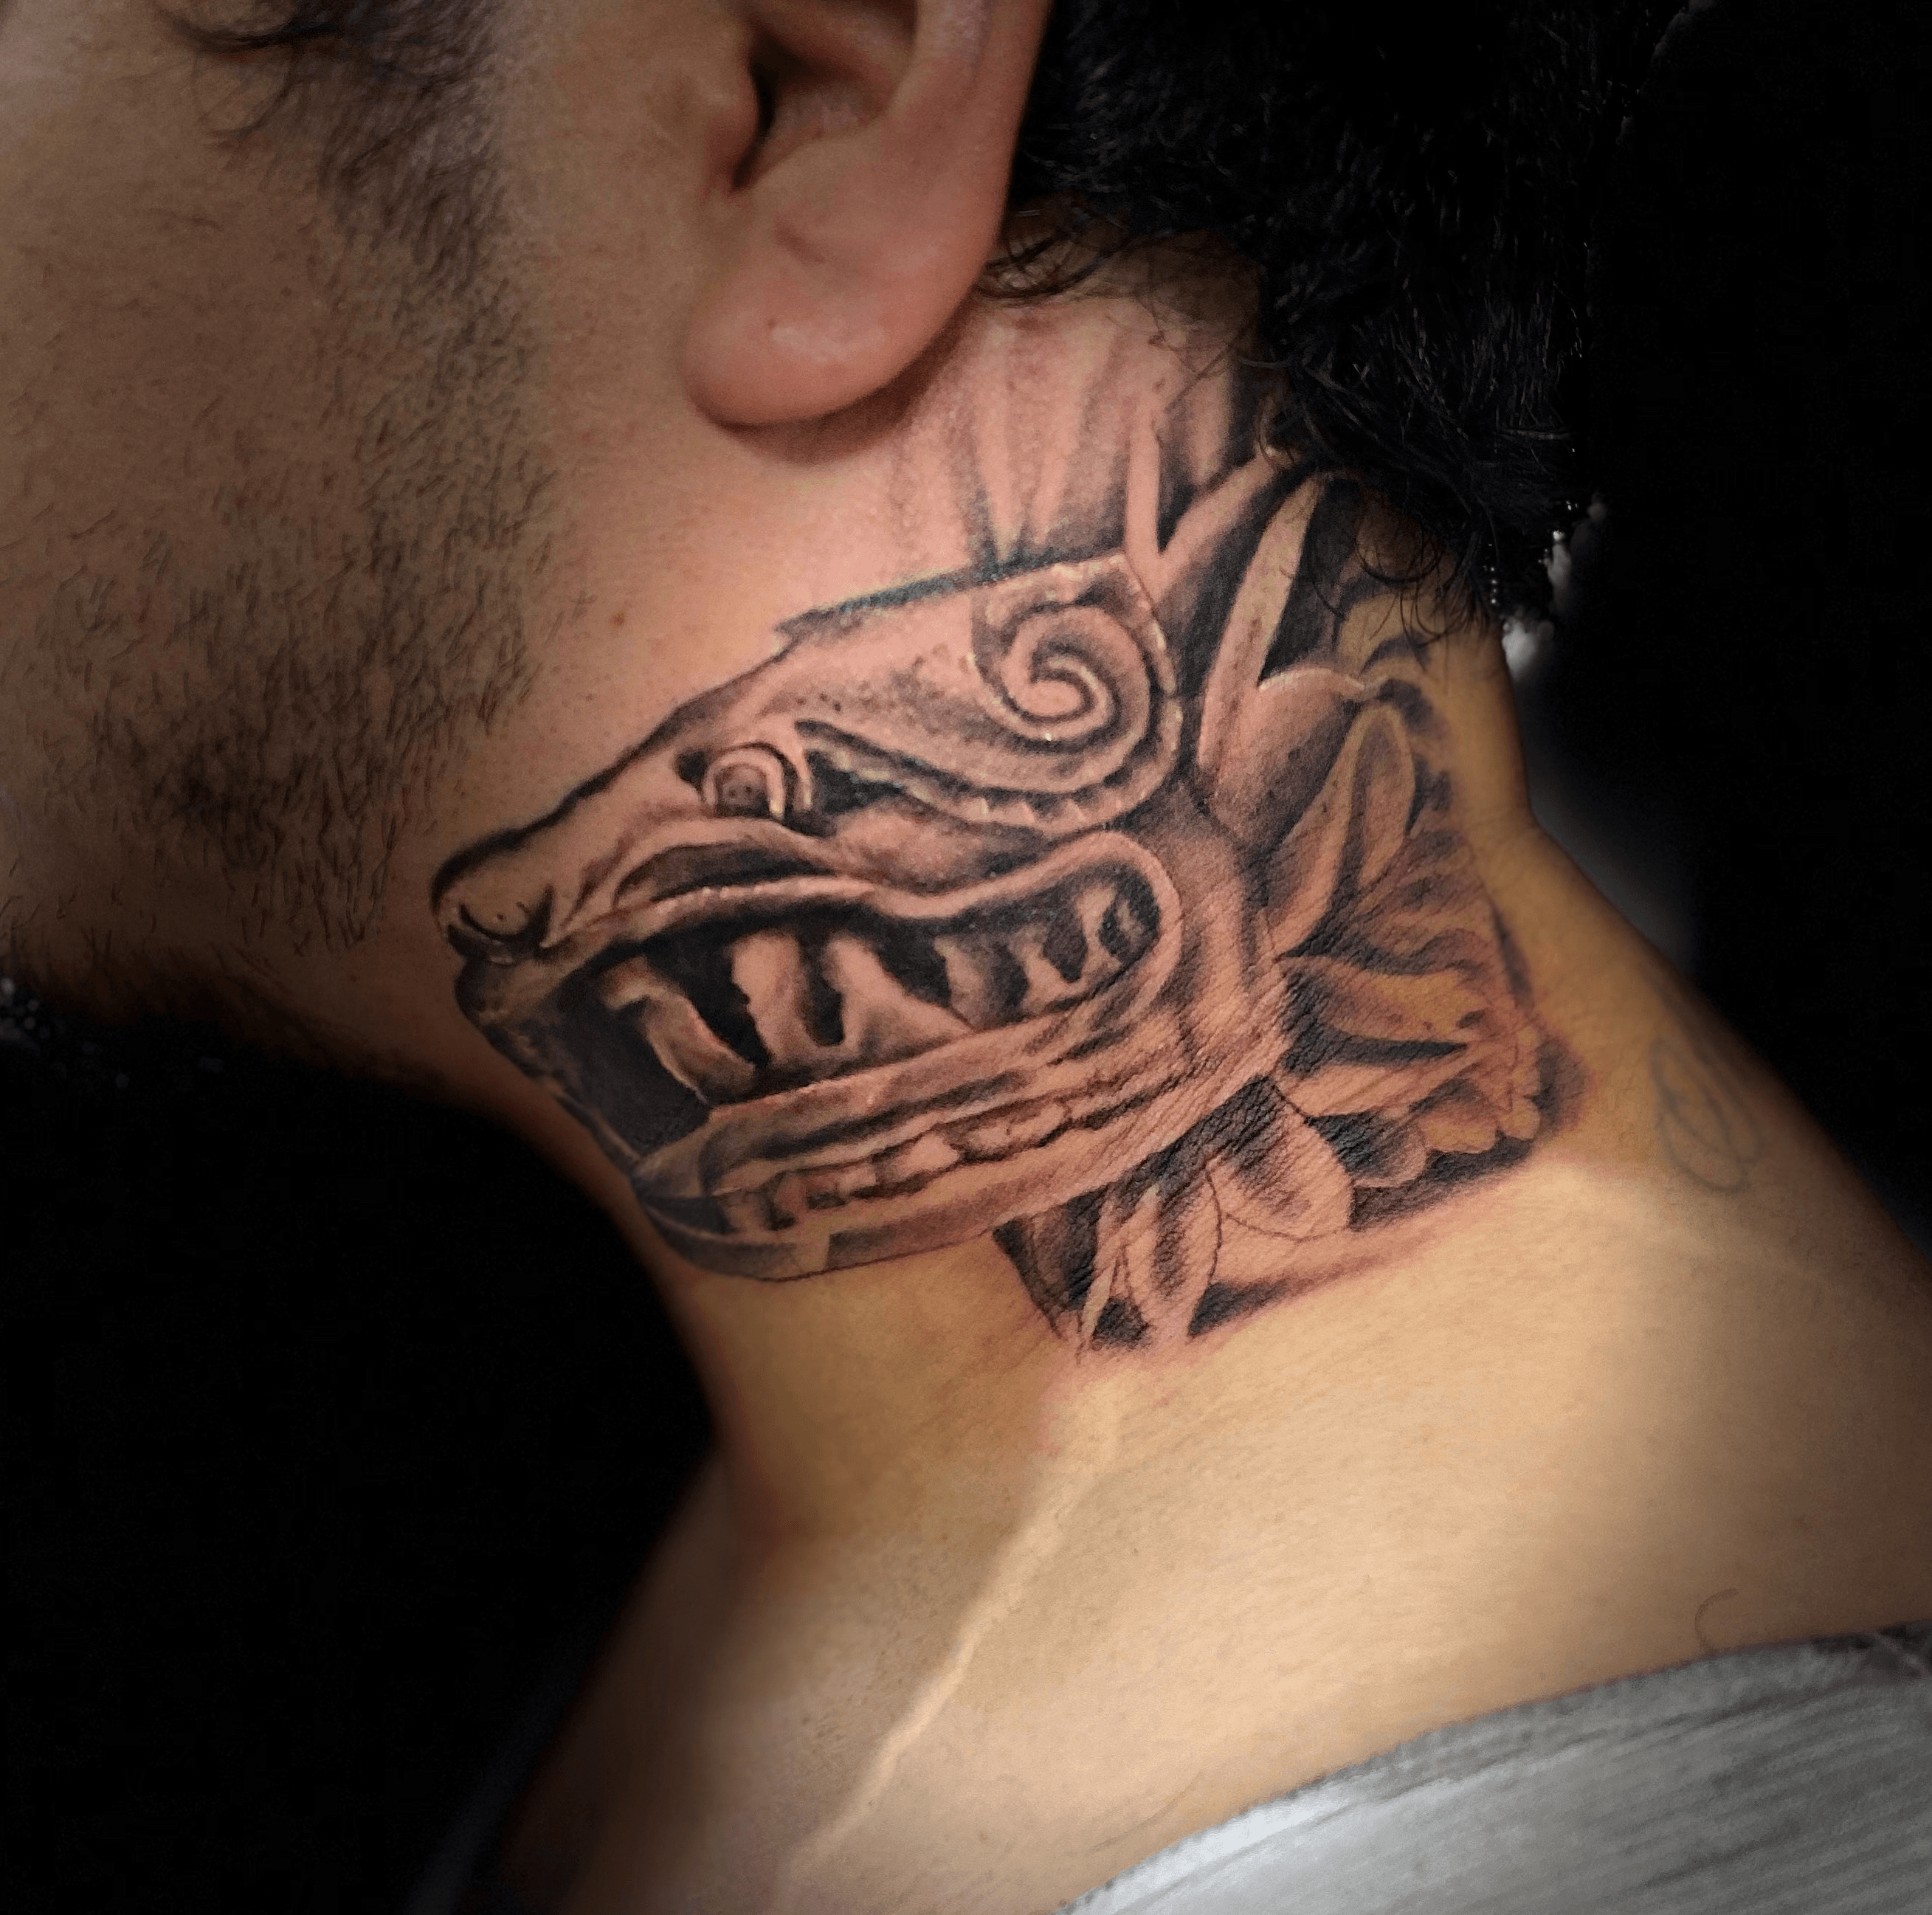 Mayan Tattoos Bangalore on Instagram LIMITED OFFER 299RS PER SQR INCH   Conditions apply   JAYANAGAR 4TH BLOCK  MARATHAHALLI BOOK YOUR  APPOINTMENTS 8550033003 7899030803